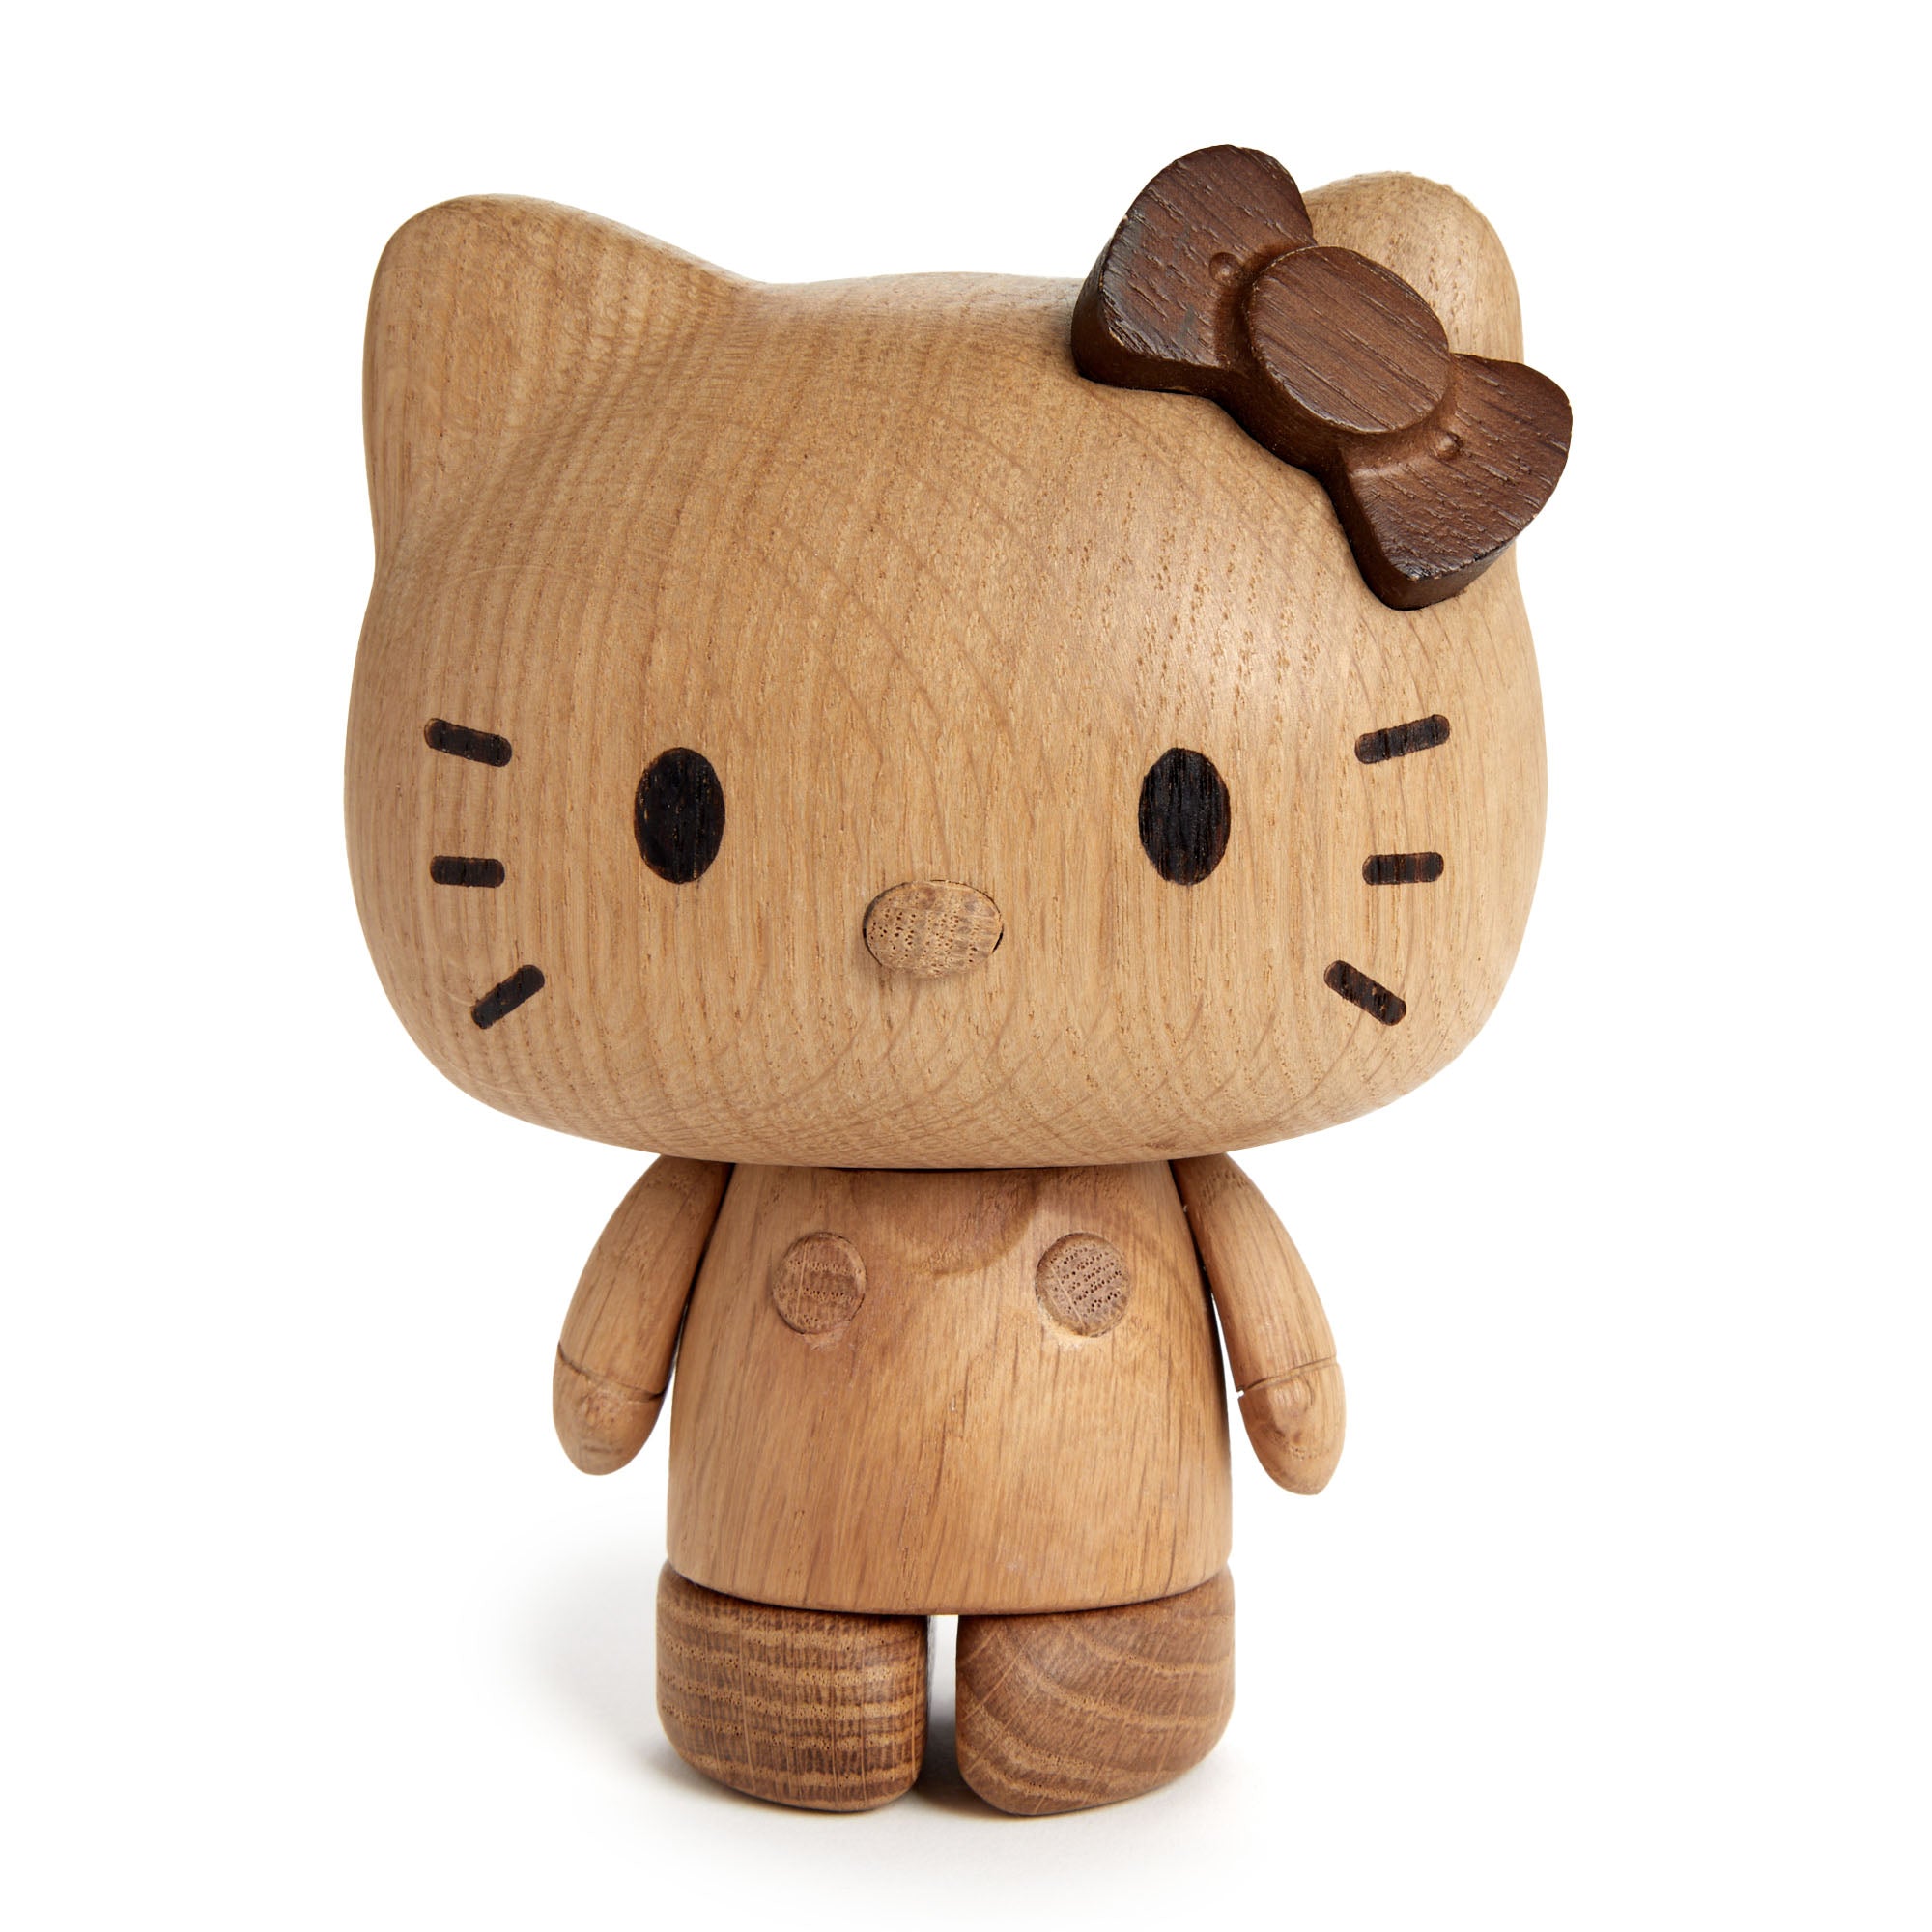 BUILD-A-BEAR WORKSHOP LAUNCHES HELLO KITTY 40TH ANNIVERSARY EDITION